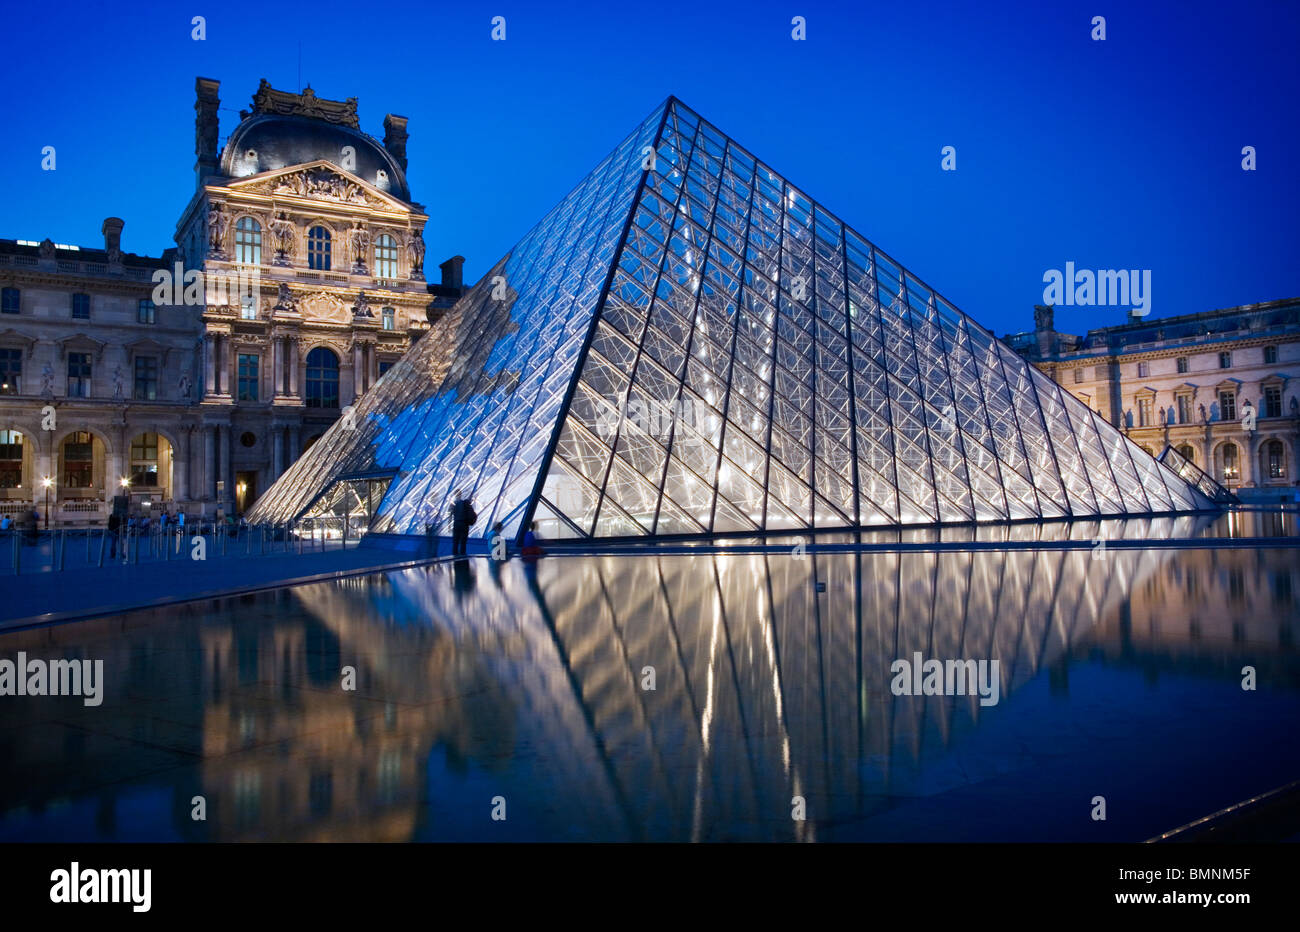 The Musee Du Louvre Pyramid with the Louvre Palais, Paris Stock Photo